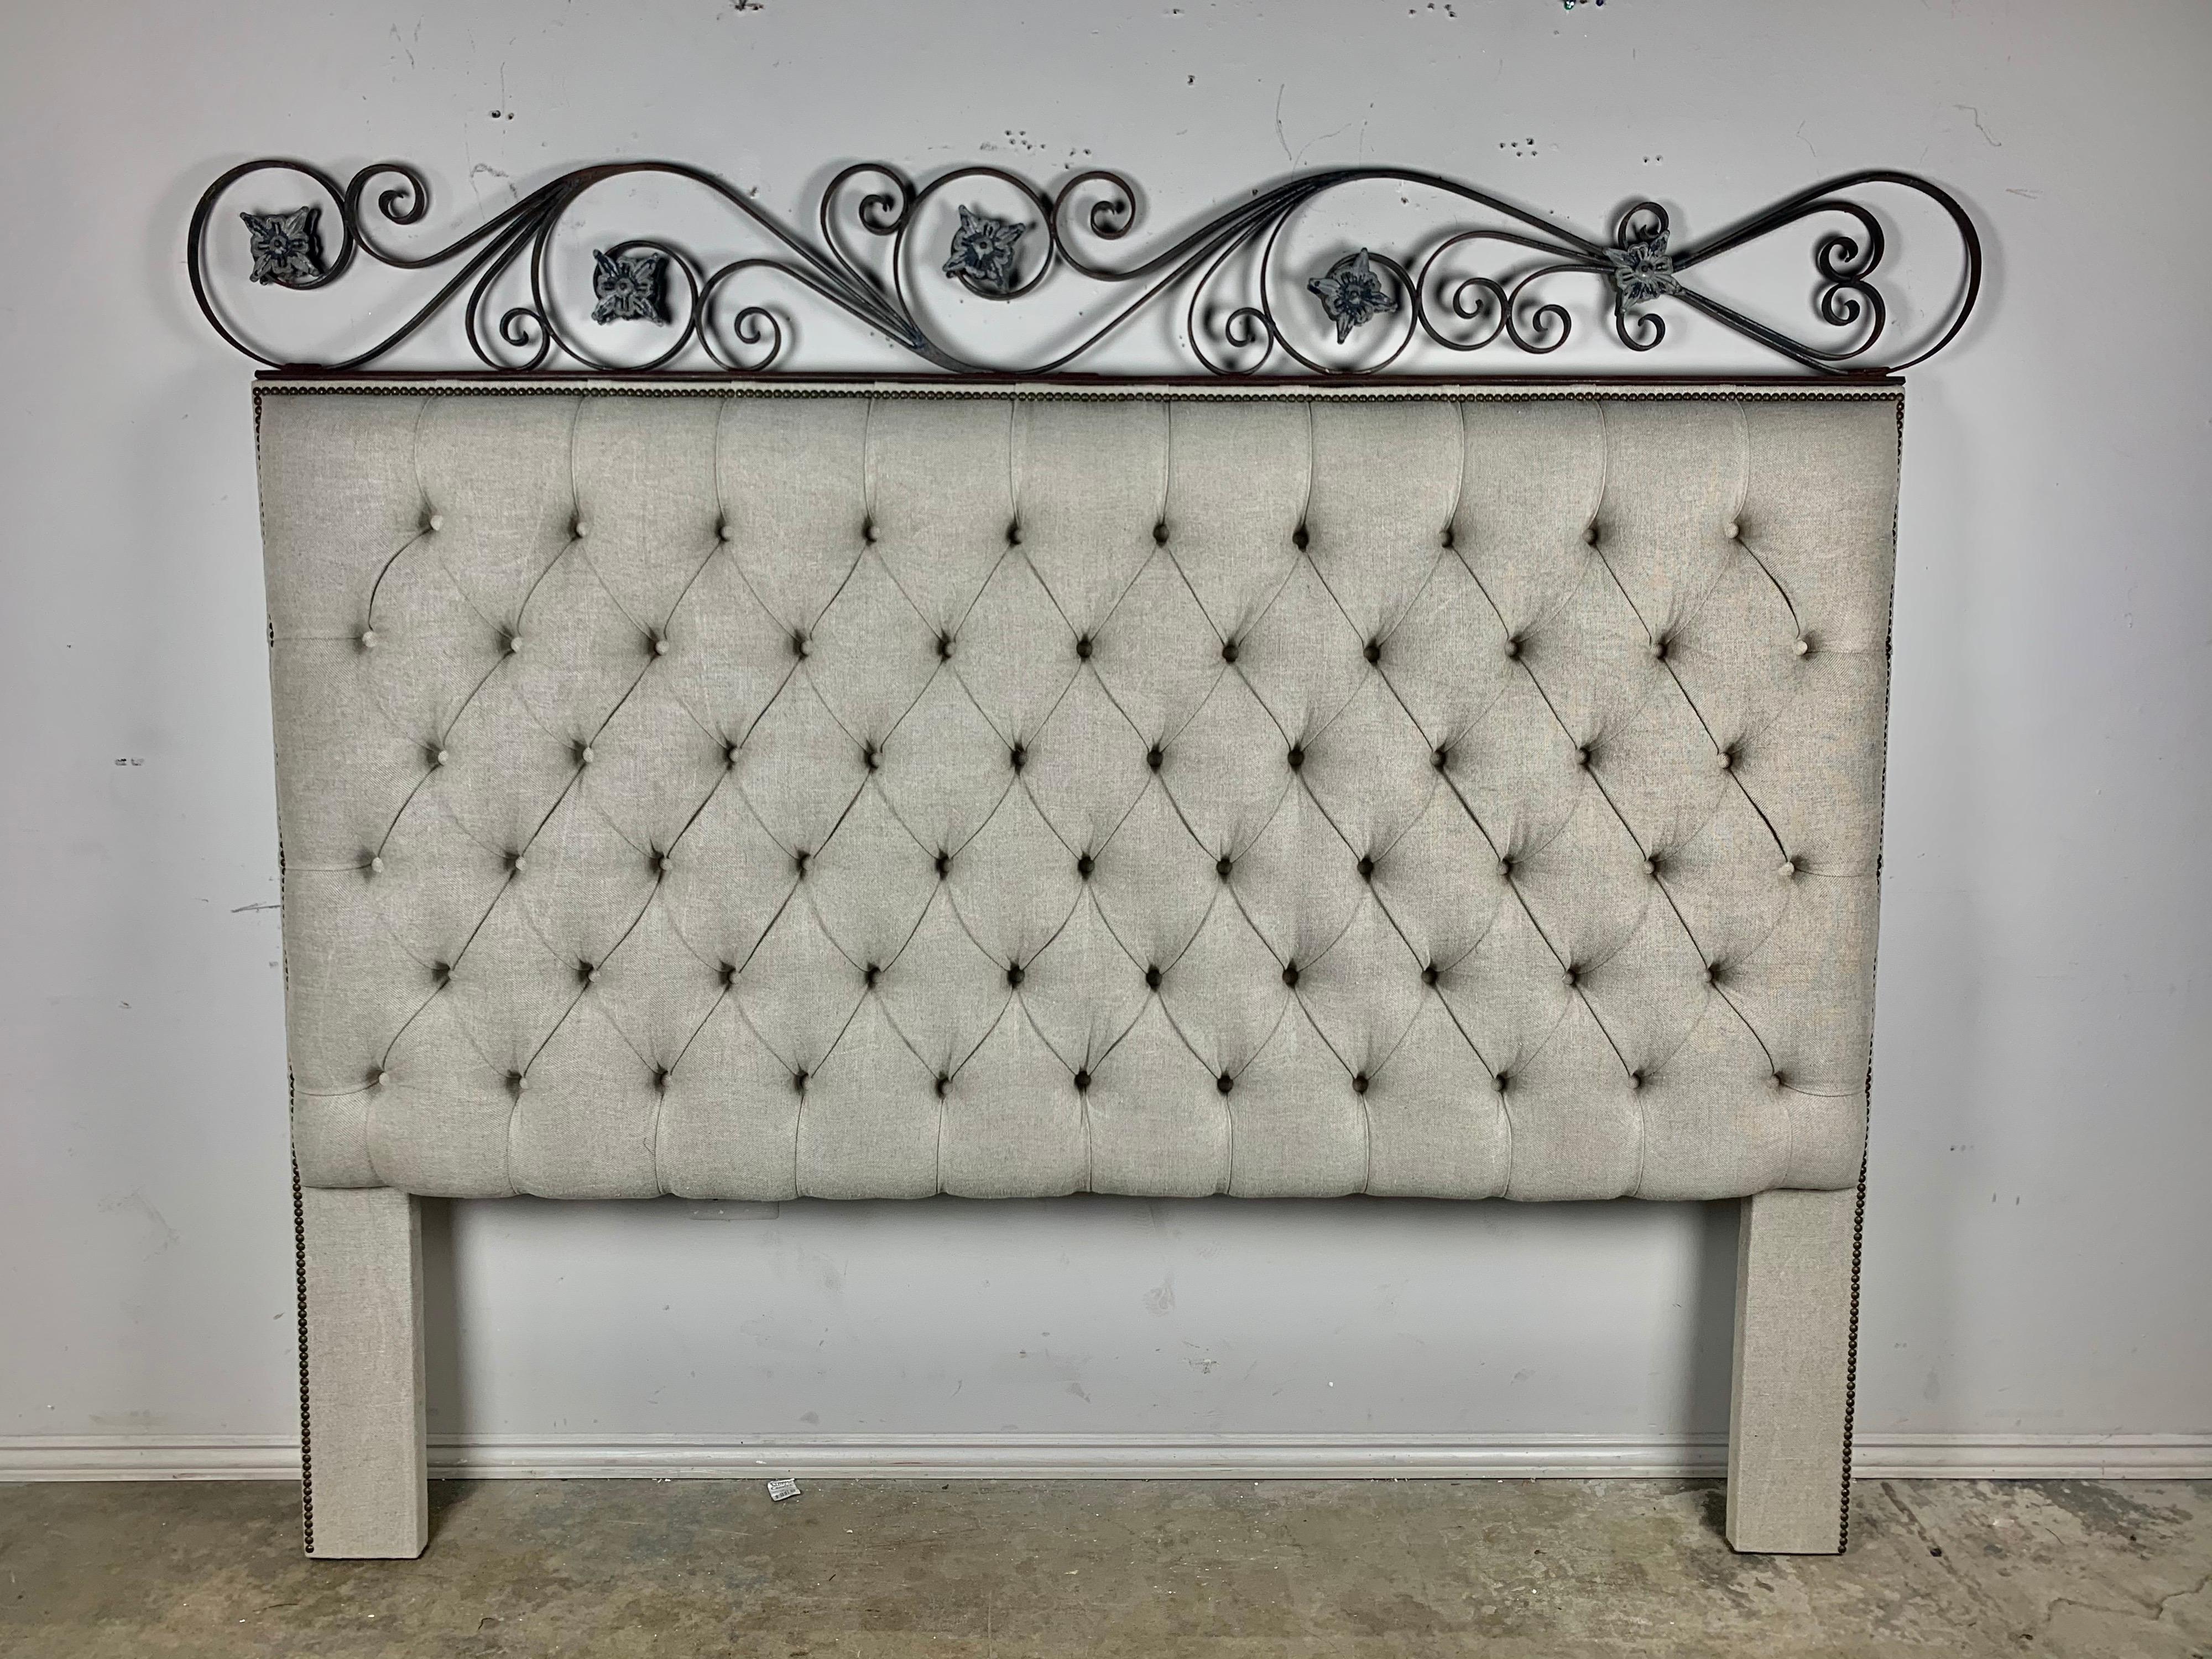 Custom King size Belgium linen tufted headboard. The headboard is crowned with beautiful scrolled ironwork depicting flowers. Antique brass nailhead trim detail.